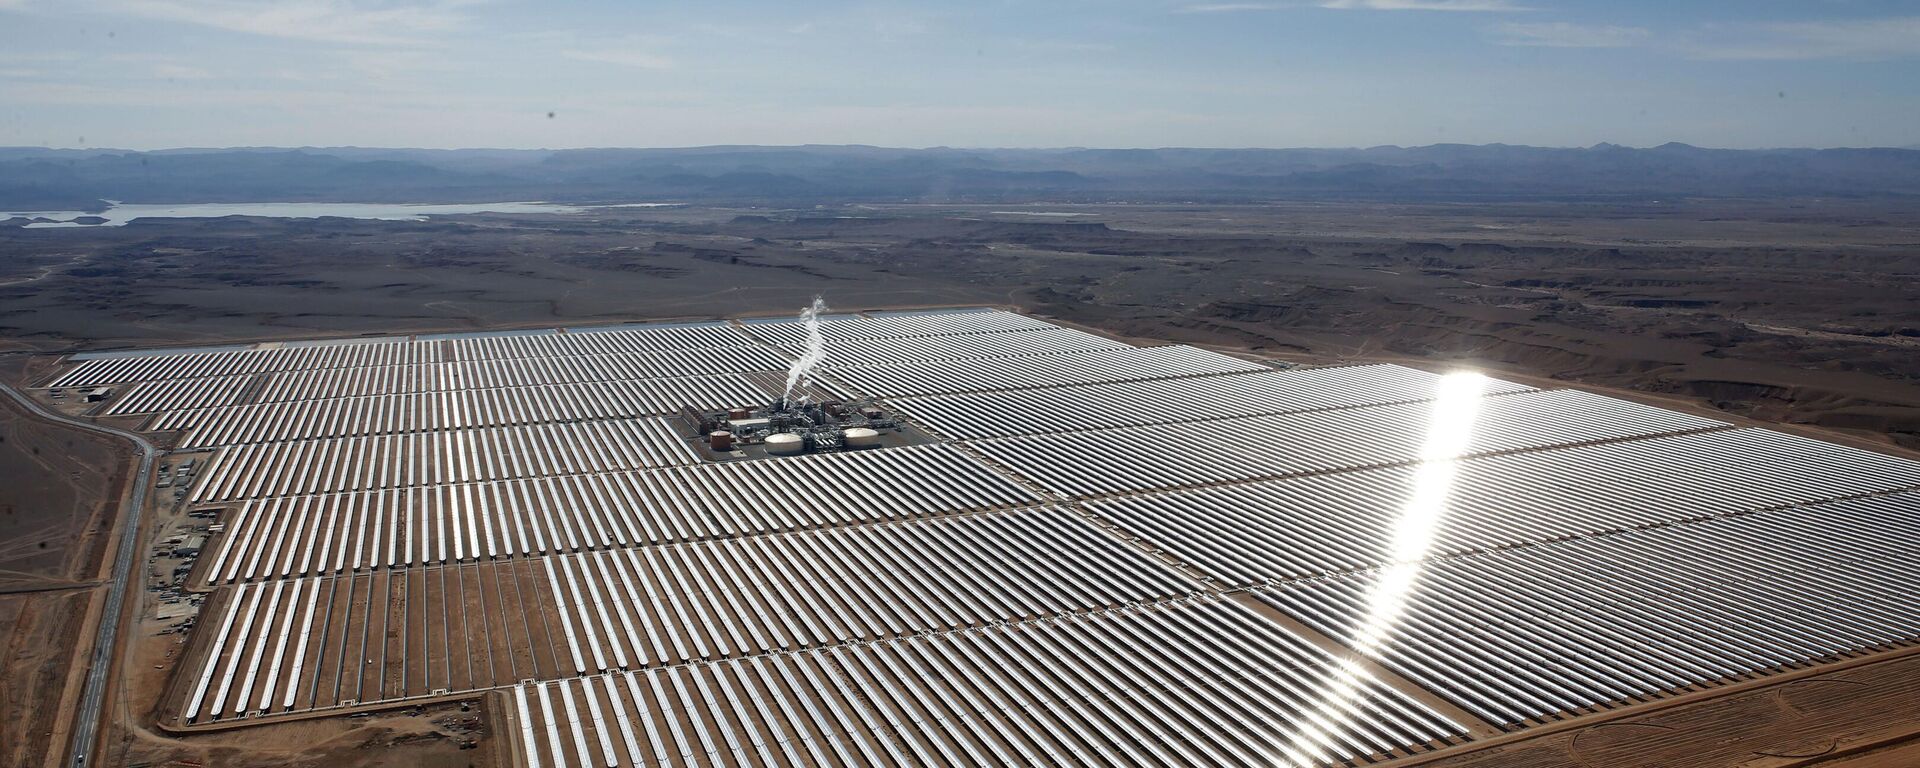  An aerial view of a solar power plant in Ouarzazate, central Morocco on Feb.4, 2016. Renewable energy's potential across the African continent remains largely untapped, according to a new report in April 2022 by the United Nation's Intergovernmental Panel on Climate Change.  - Sputnik Africa, 1920, 25.05.2023